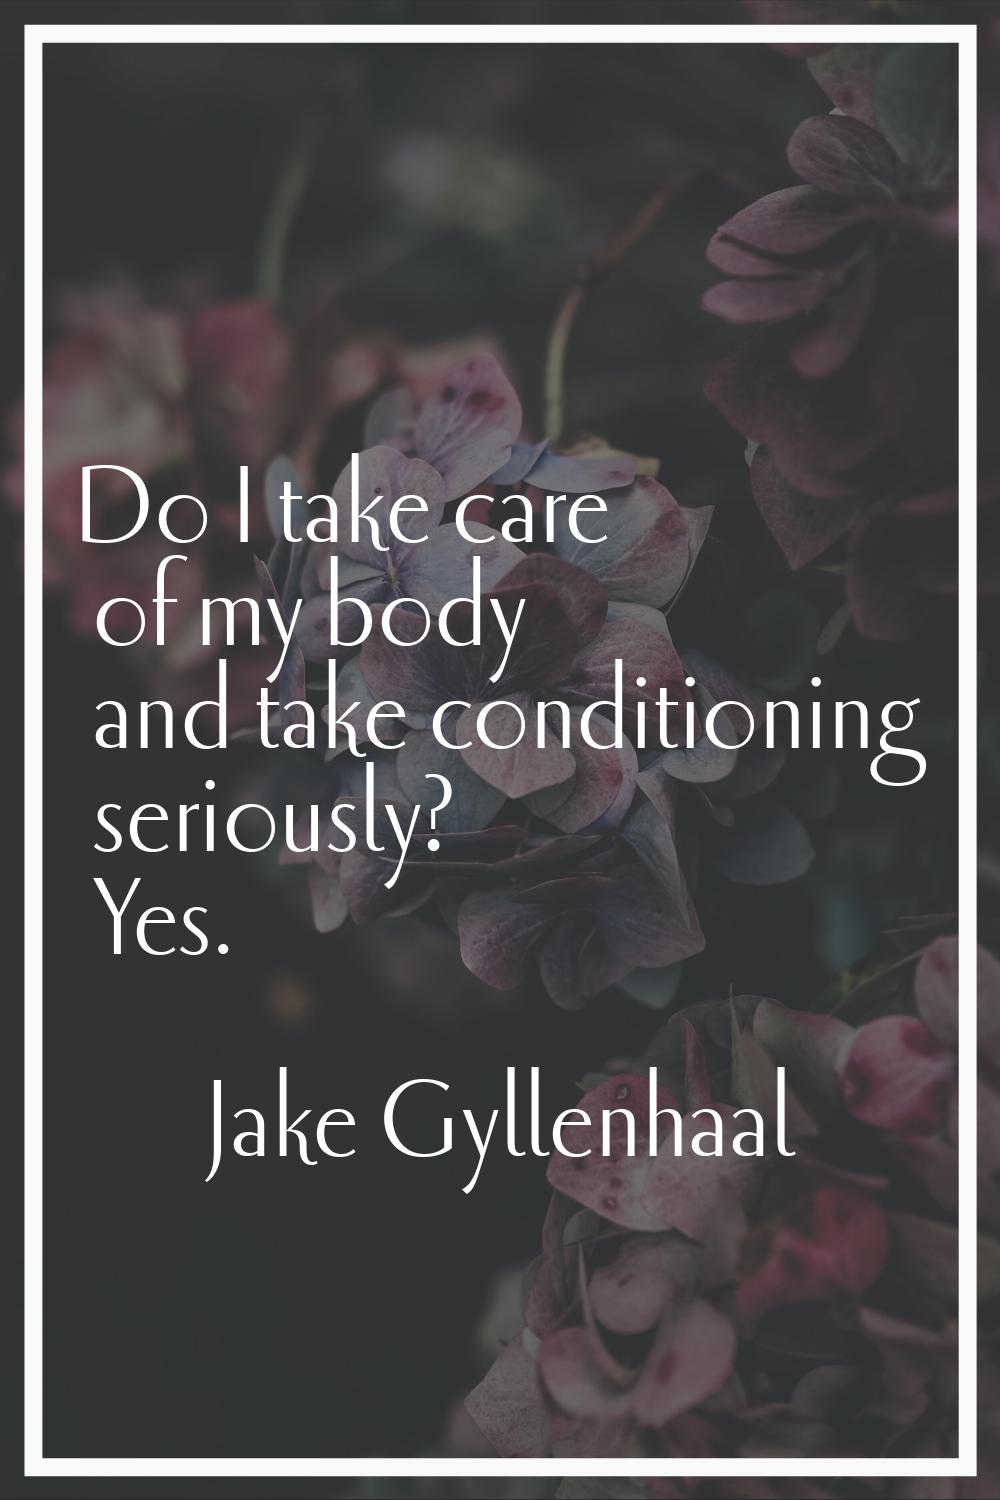 Do I take care of my body and take conditioning seriously? Yes.